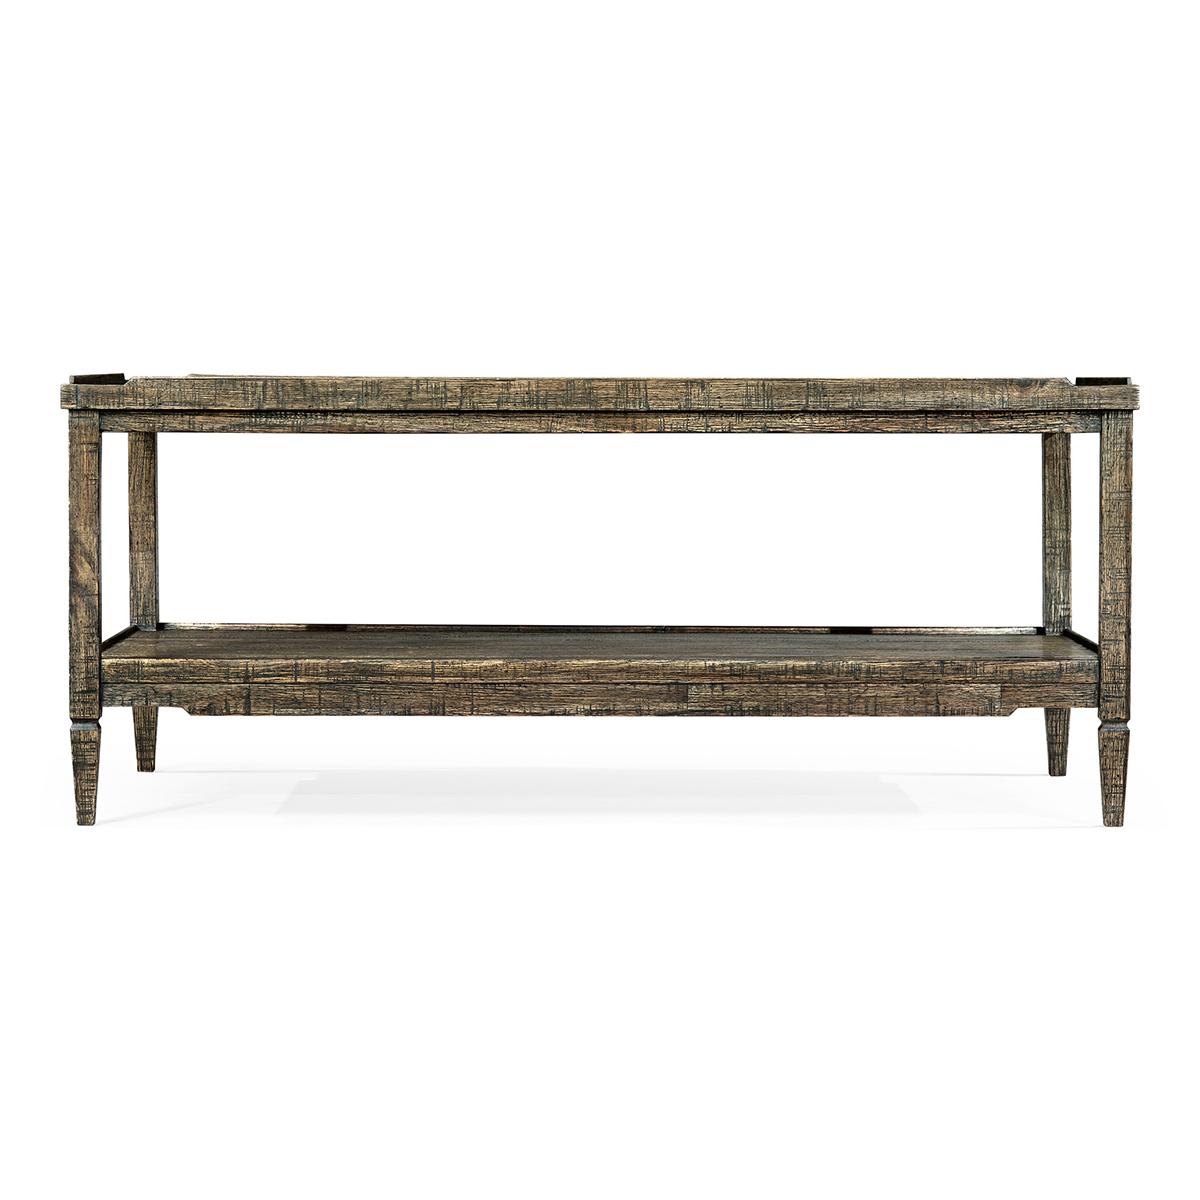 French rustic country coffee table in a distressed dark driftwood finish with a wooden gallery, square tapered legs and a lower tier shelf.

Dimensions: 48